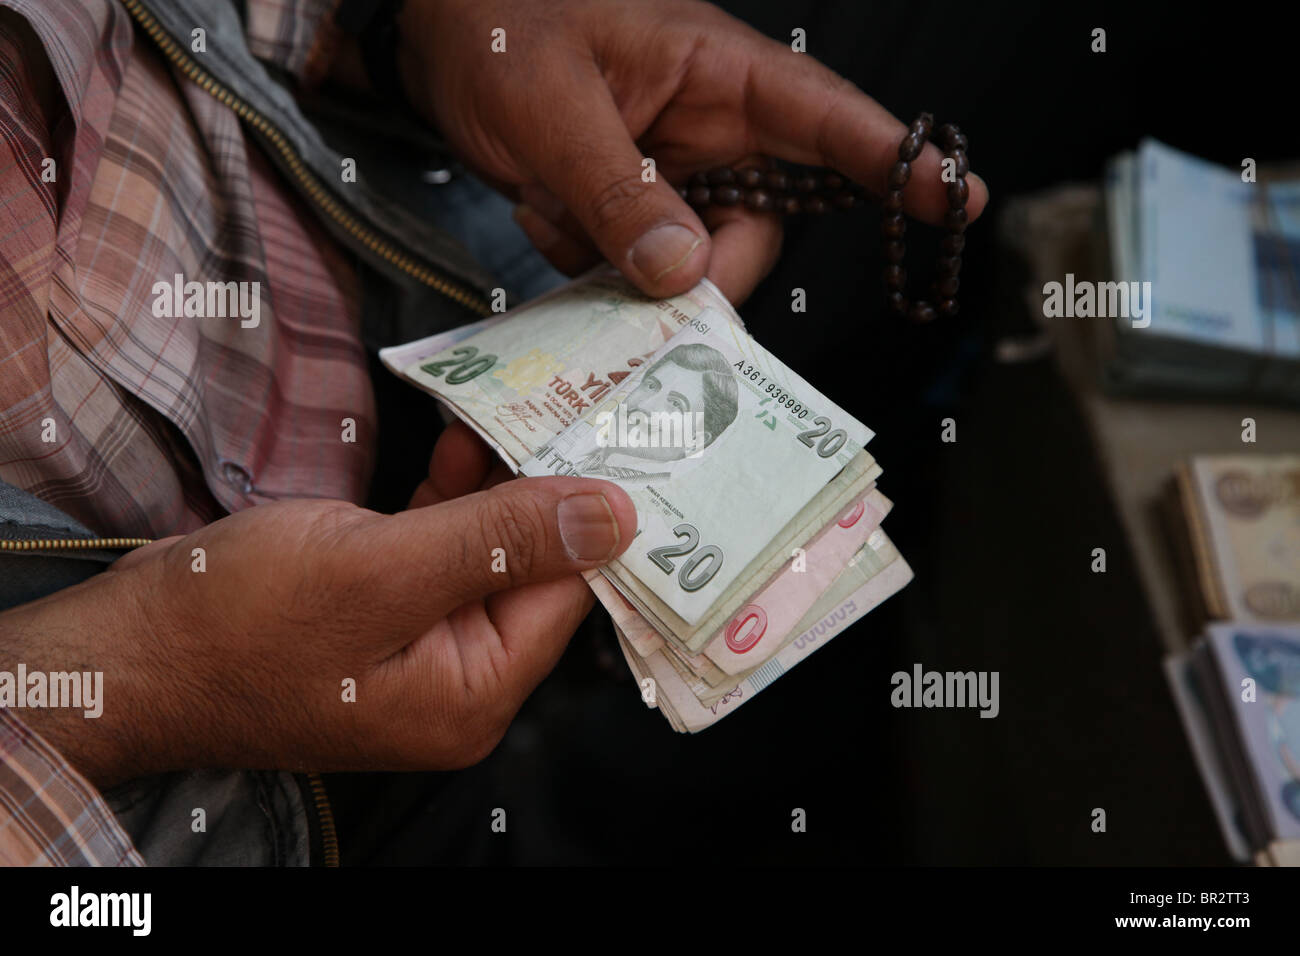 A vendor counting Turkish Lira banknotes in the market Turkey Stock Photo